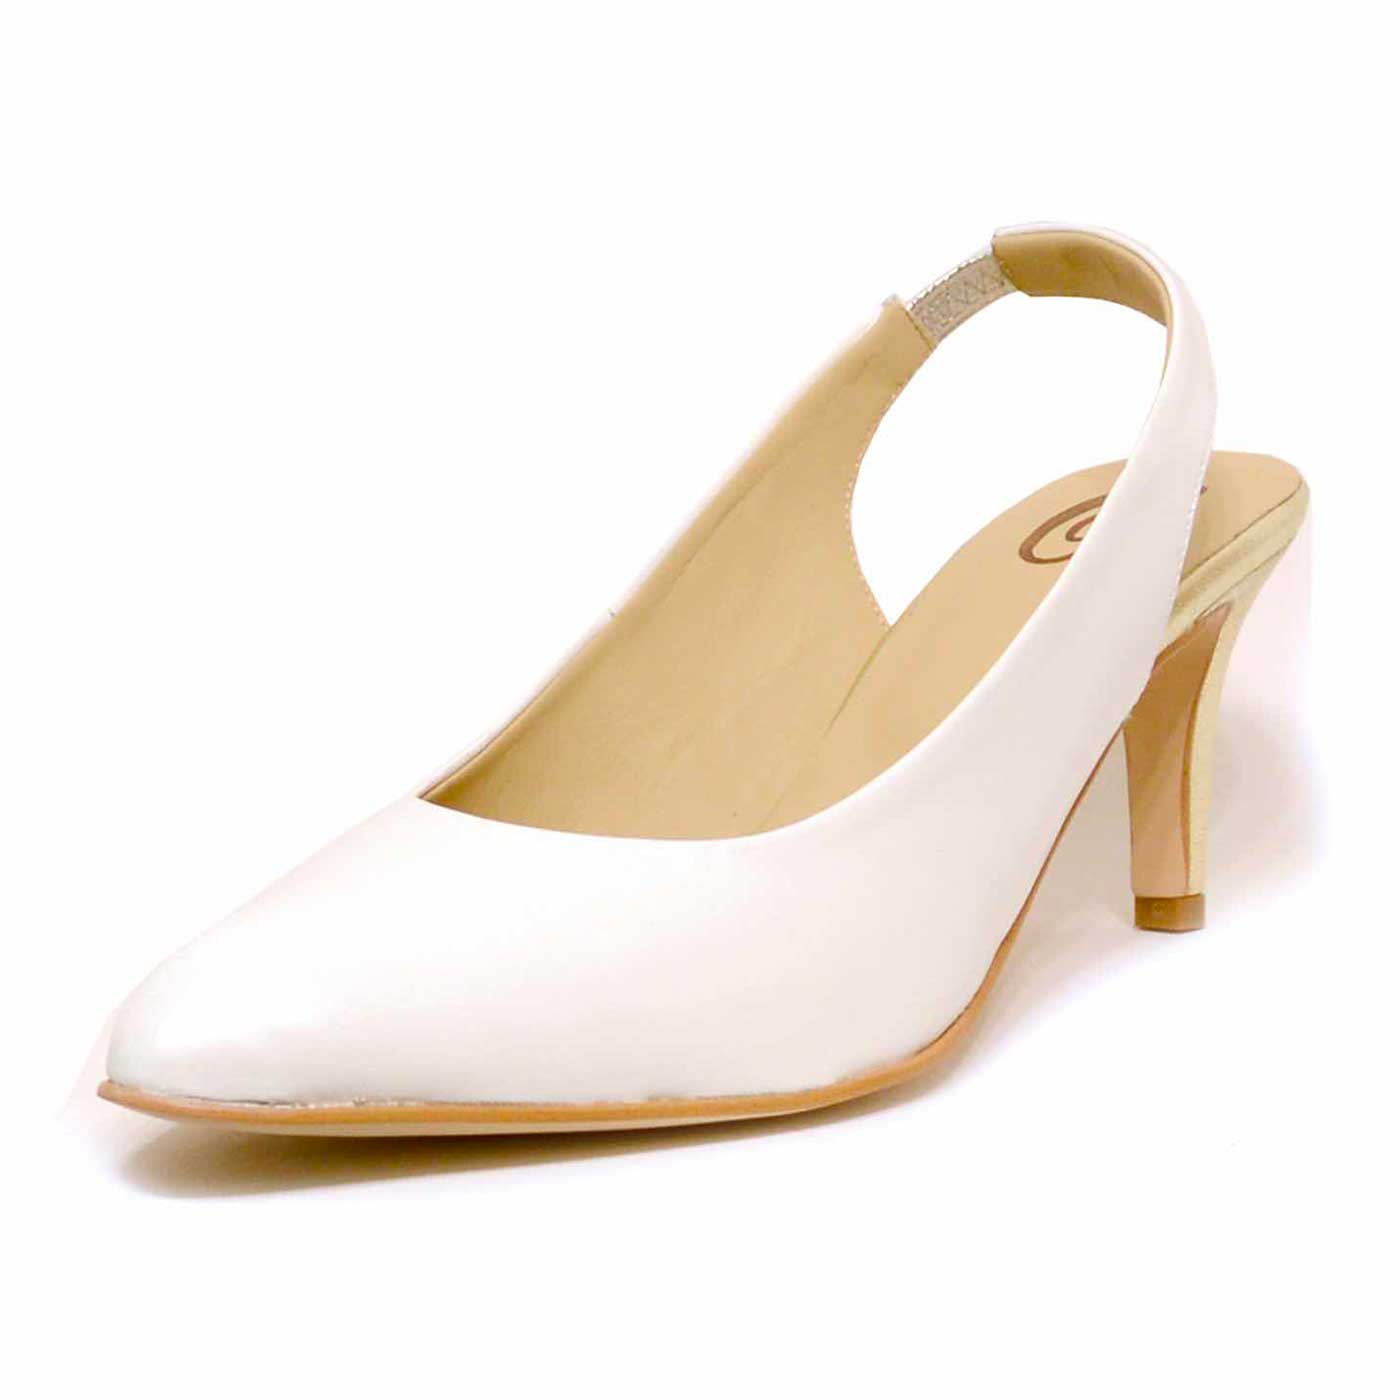 sandales cuir lisse blanc, chaussures femme grande taille